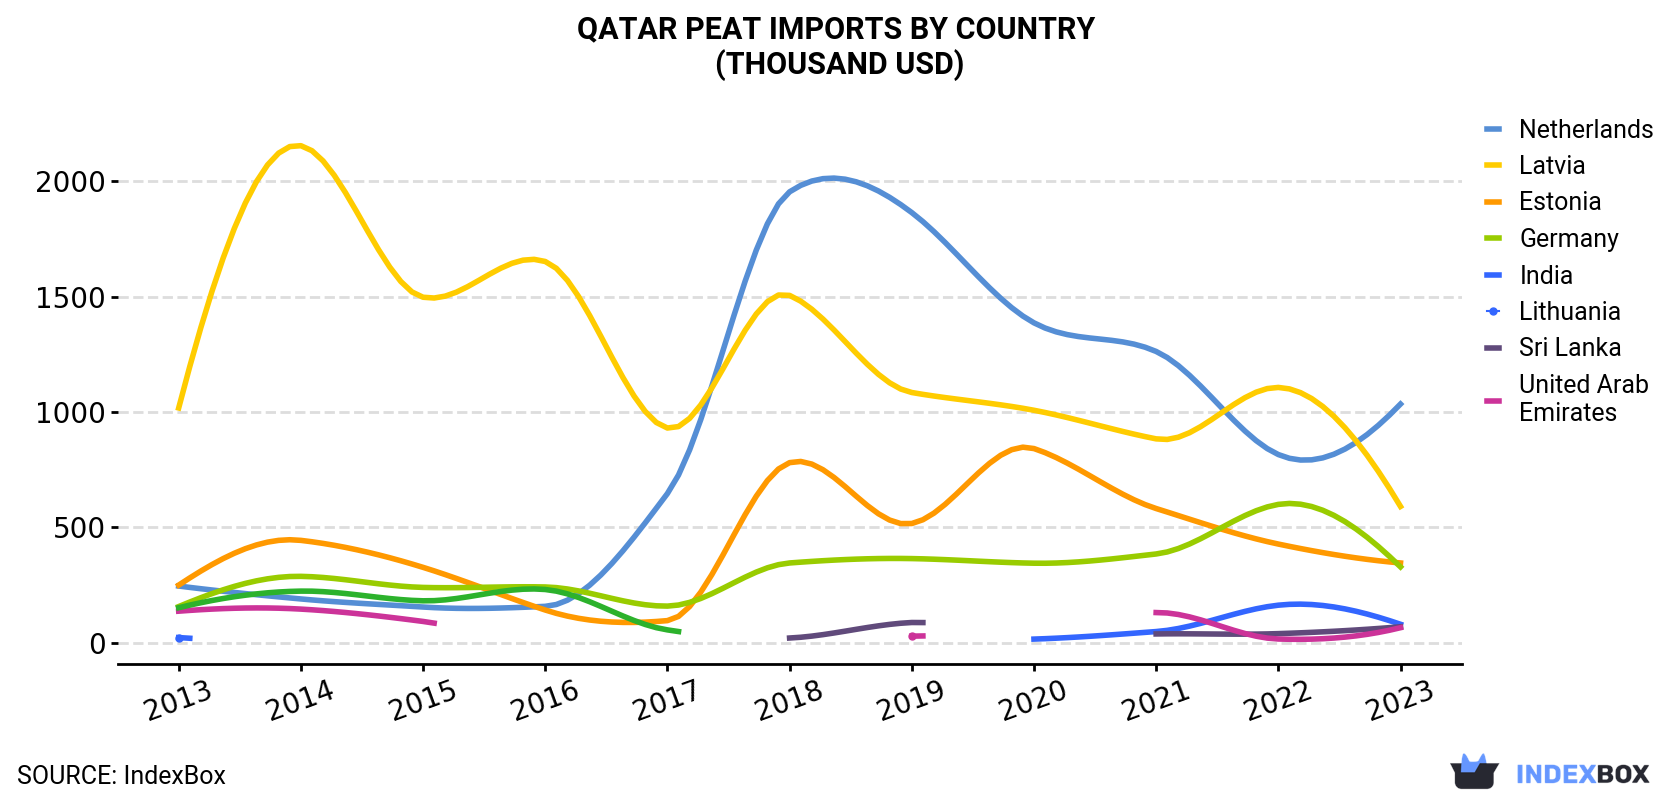 Qatar Peat Imports By Country (Thousand USD)